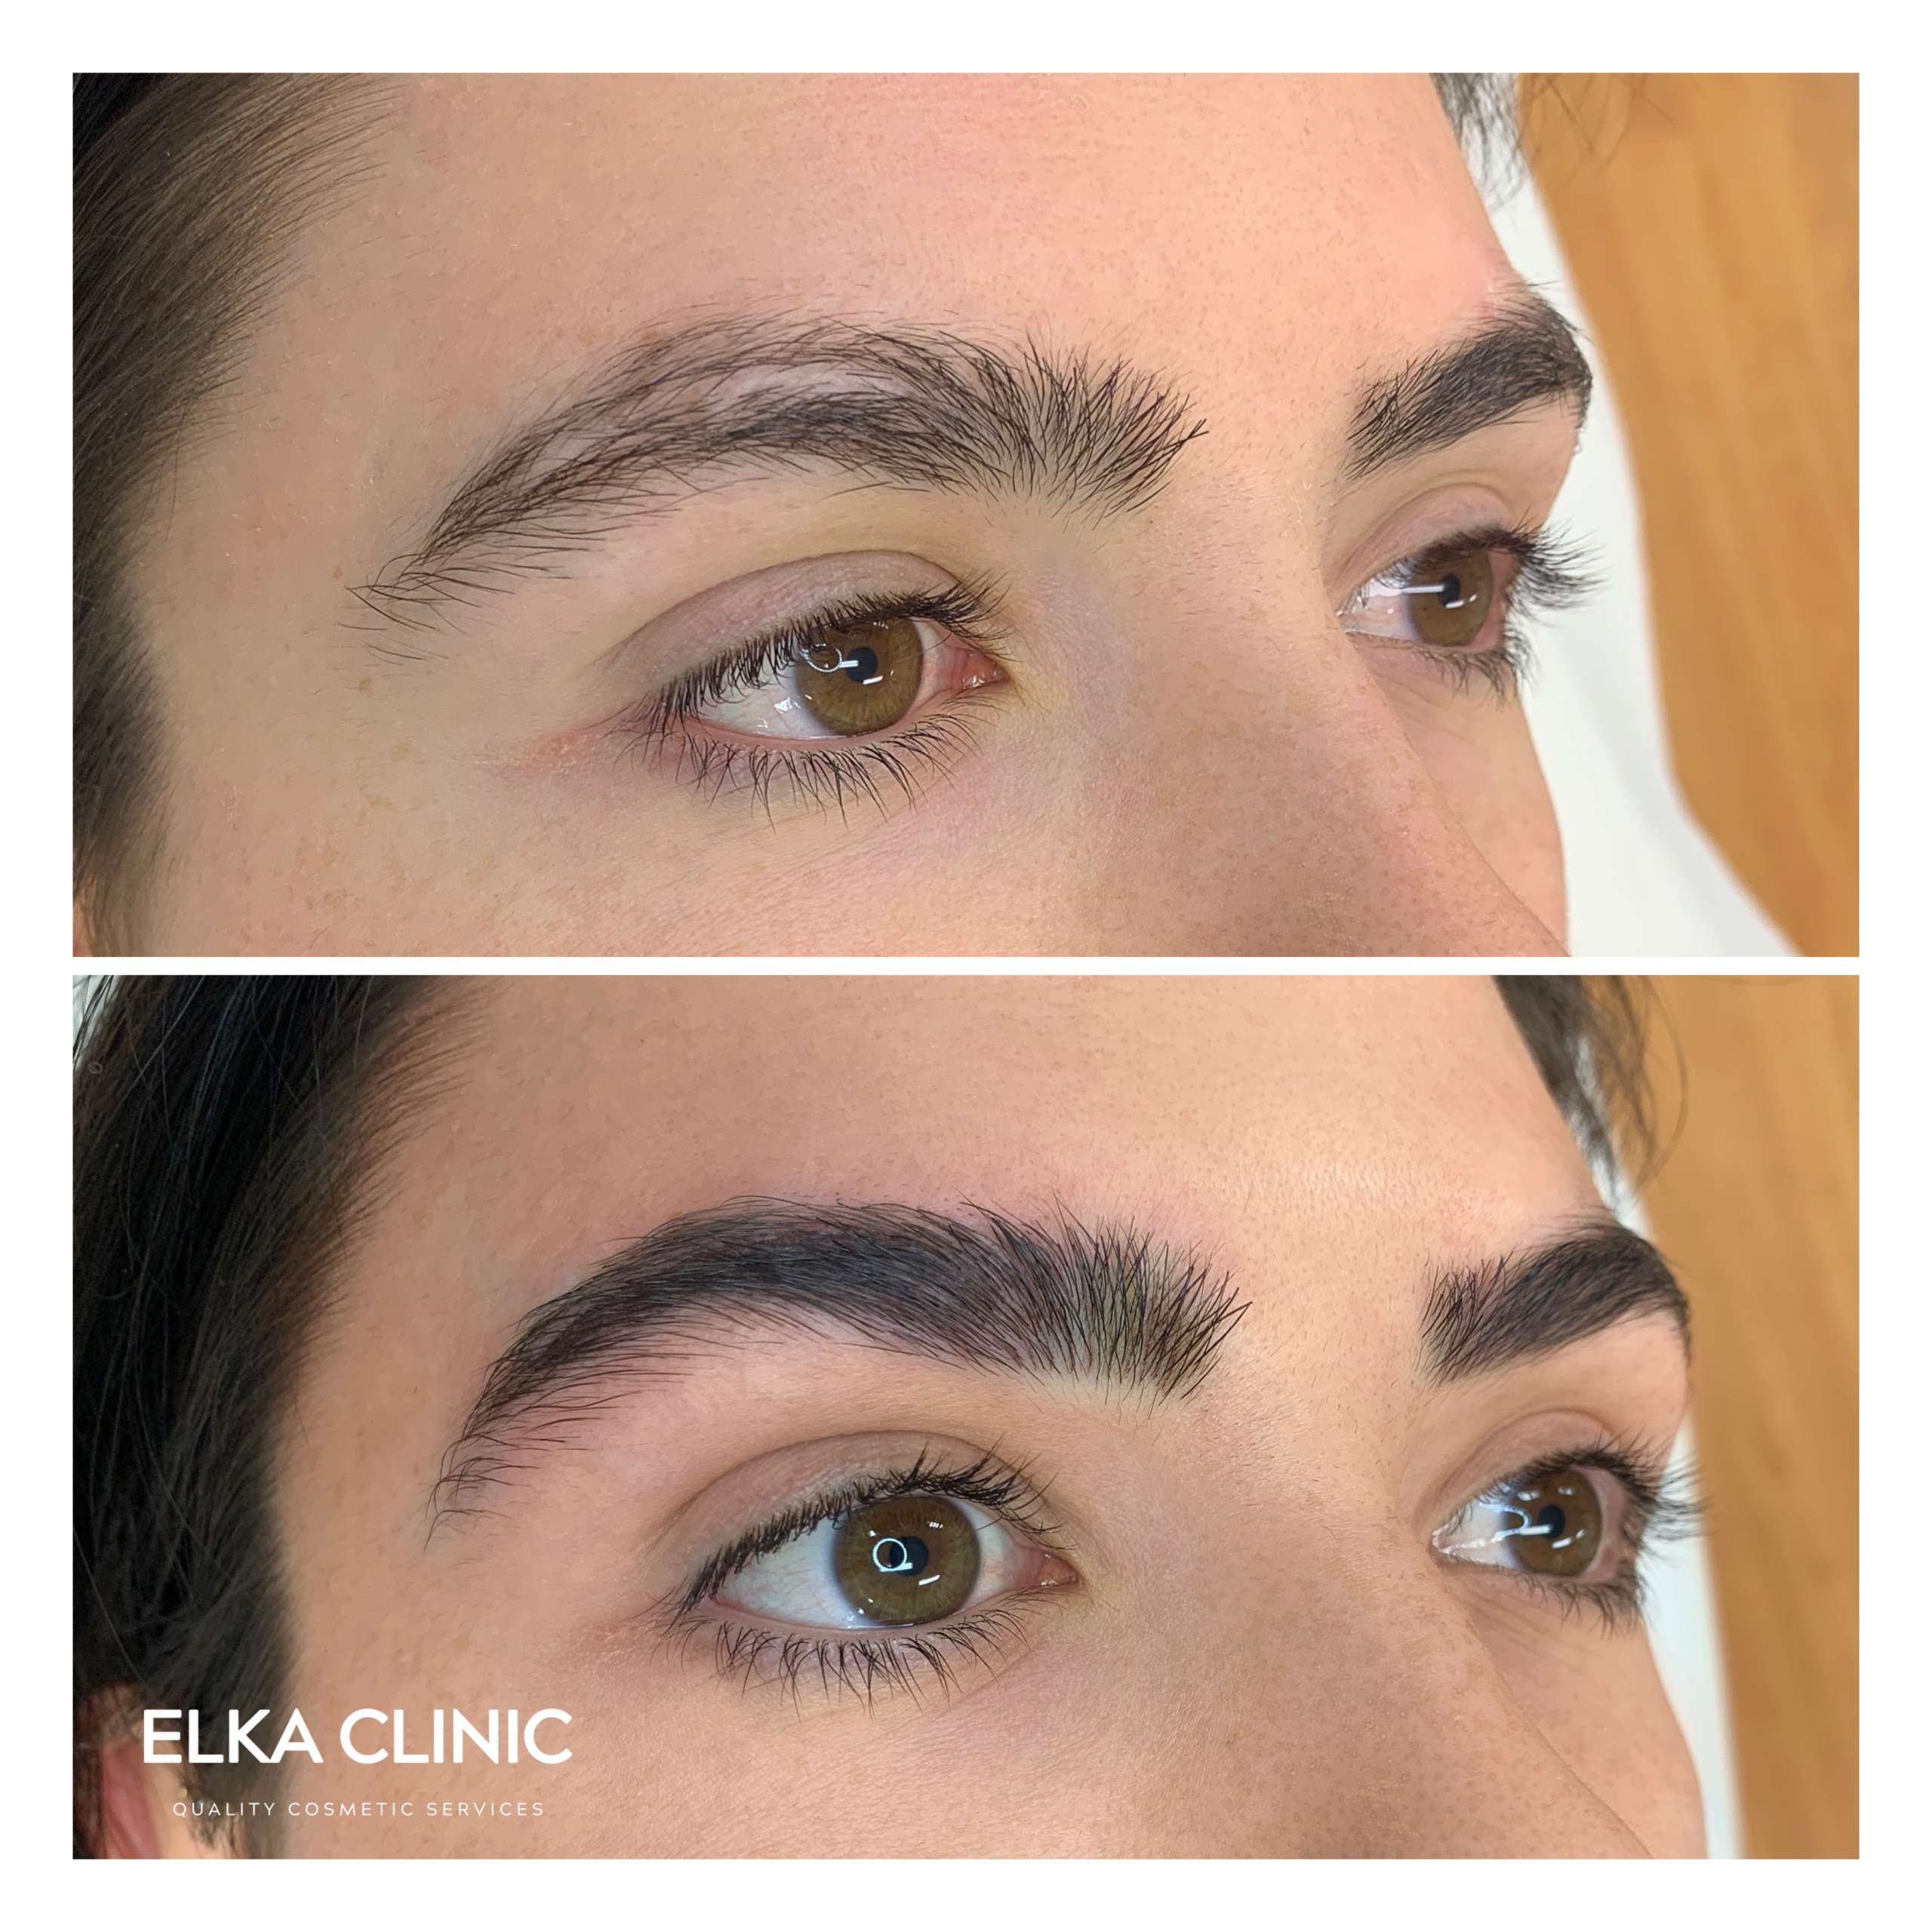 Scar Coverage with Eyebrow Tattooing and Nano brows